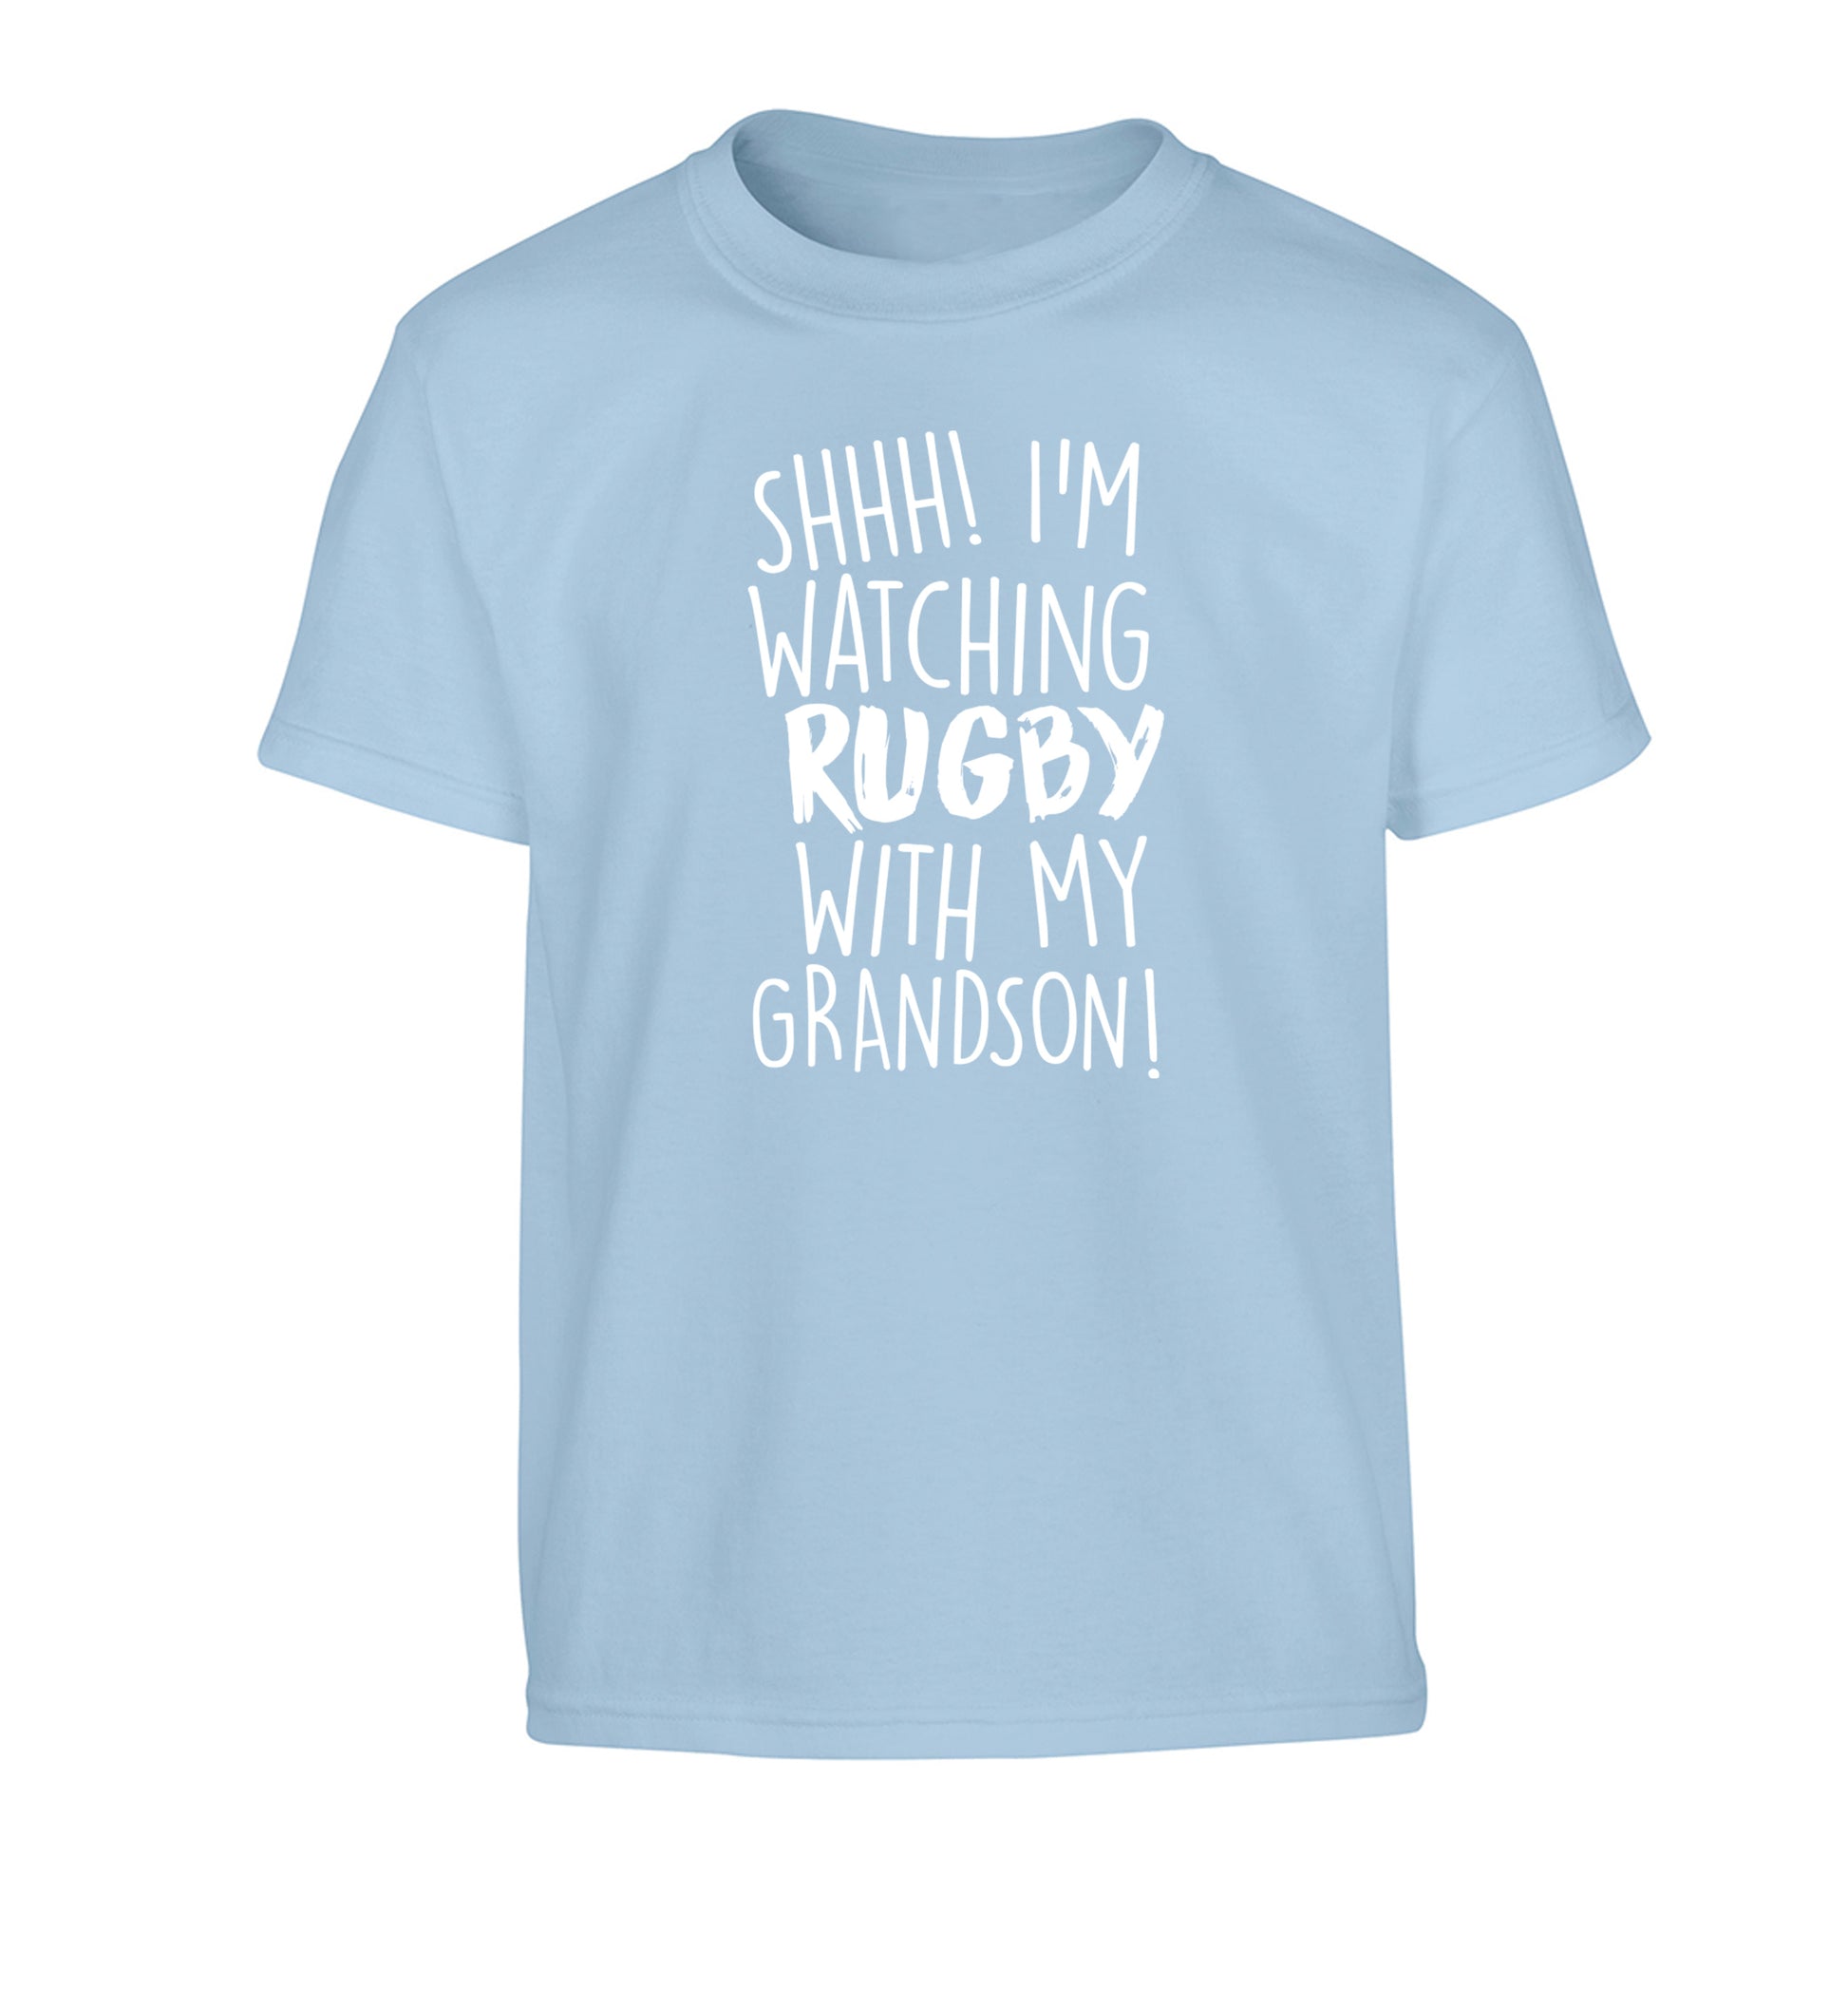 Shh I'm watching rugby with my grandson Children's light blue Tshirt 12-13 Years